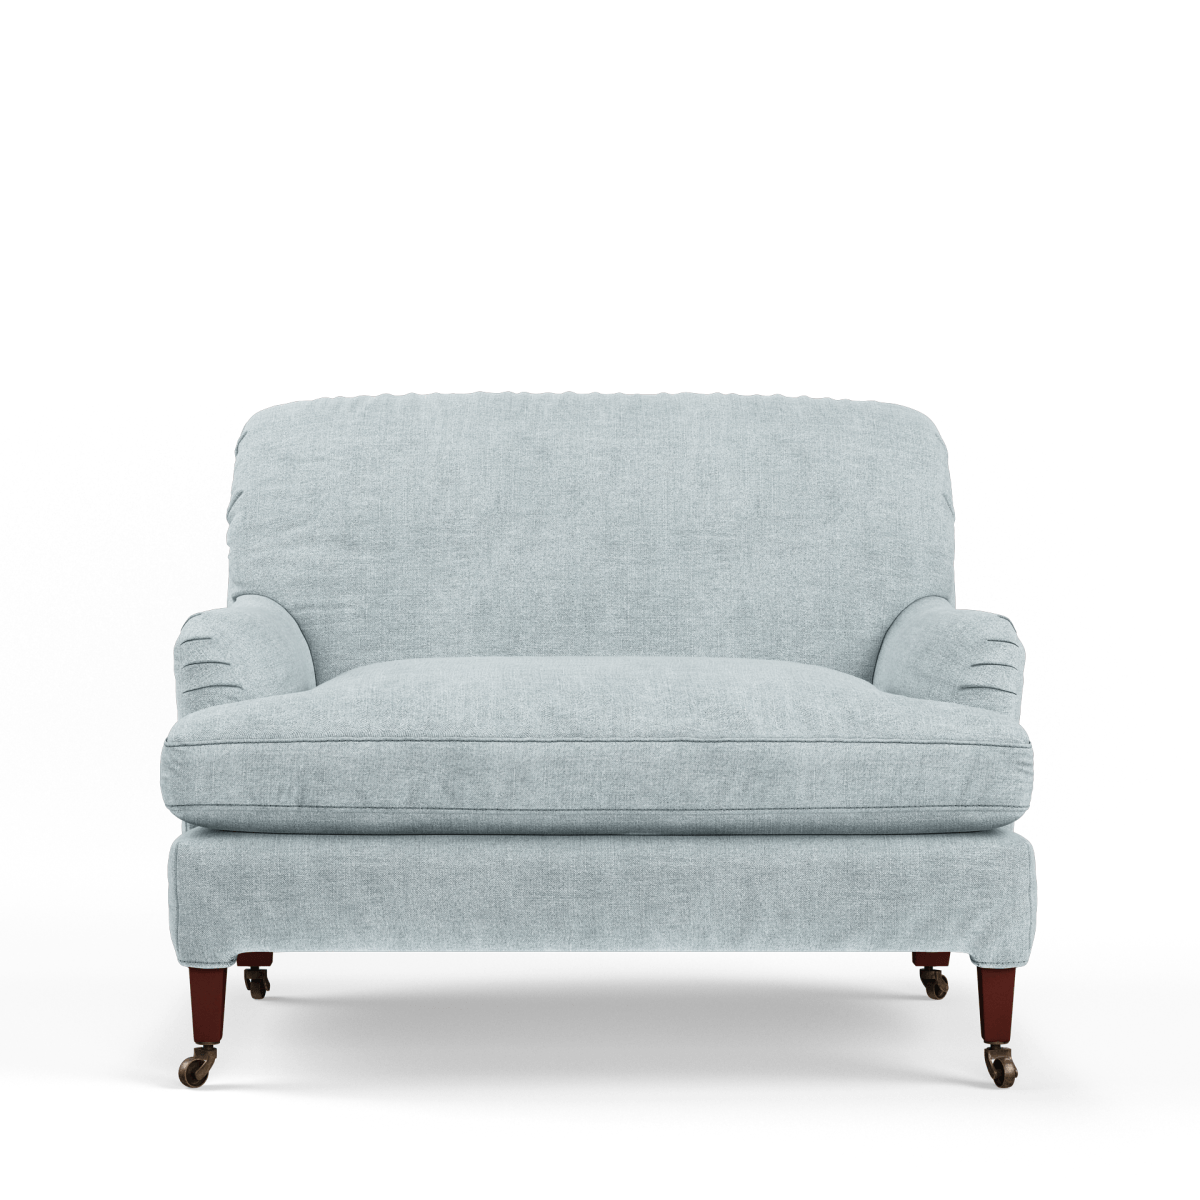 Linen Loose Cover for Large Coleridge Armchair - Ice Blue